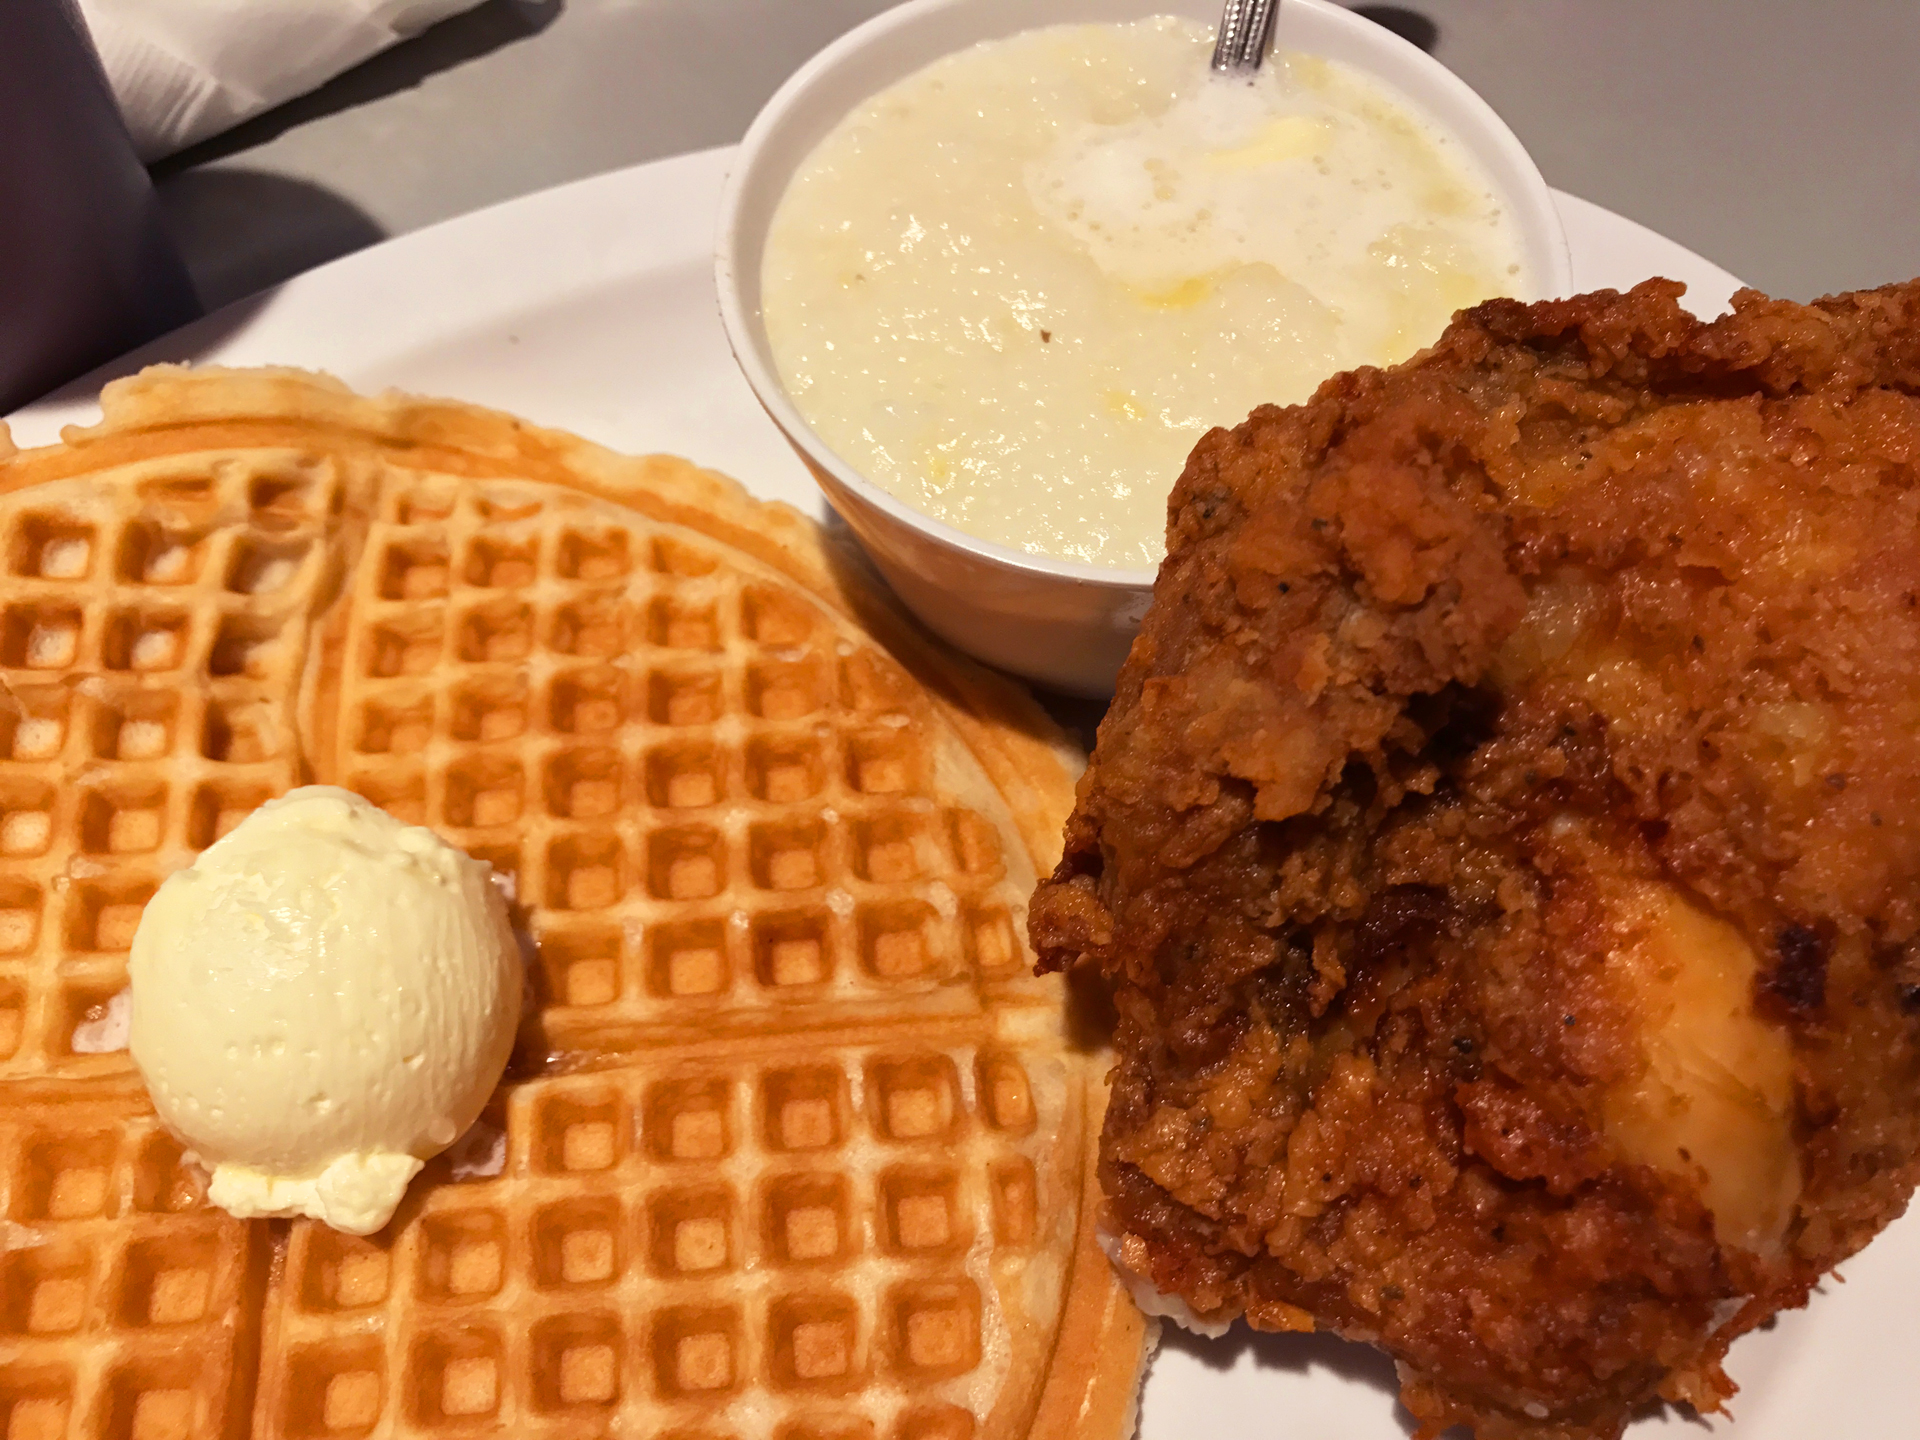 Fried Chicken and Waffles at House of Chicken and Waffles in Oakland's Jack London Square.